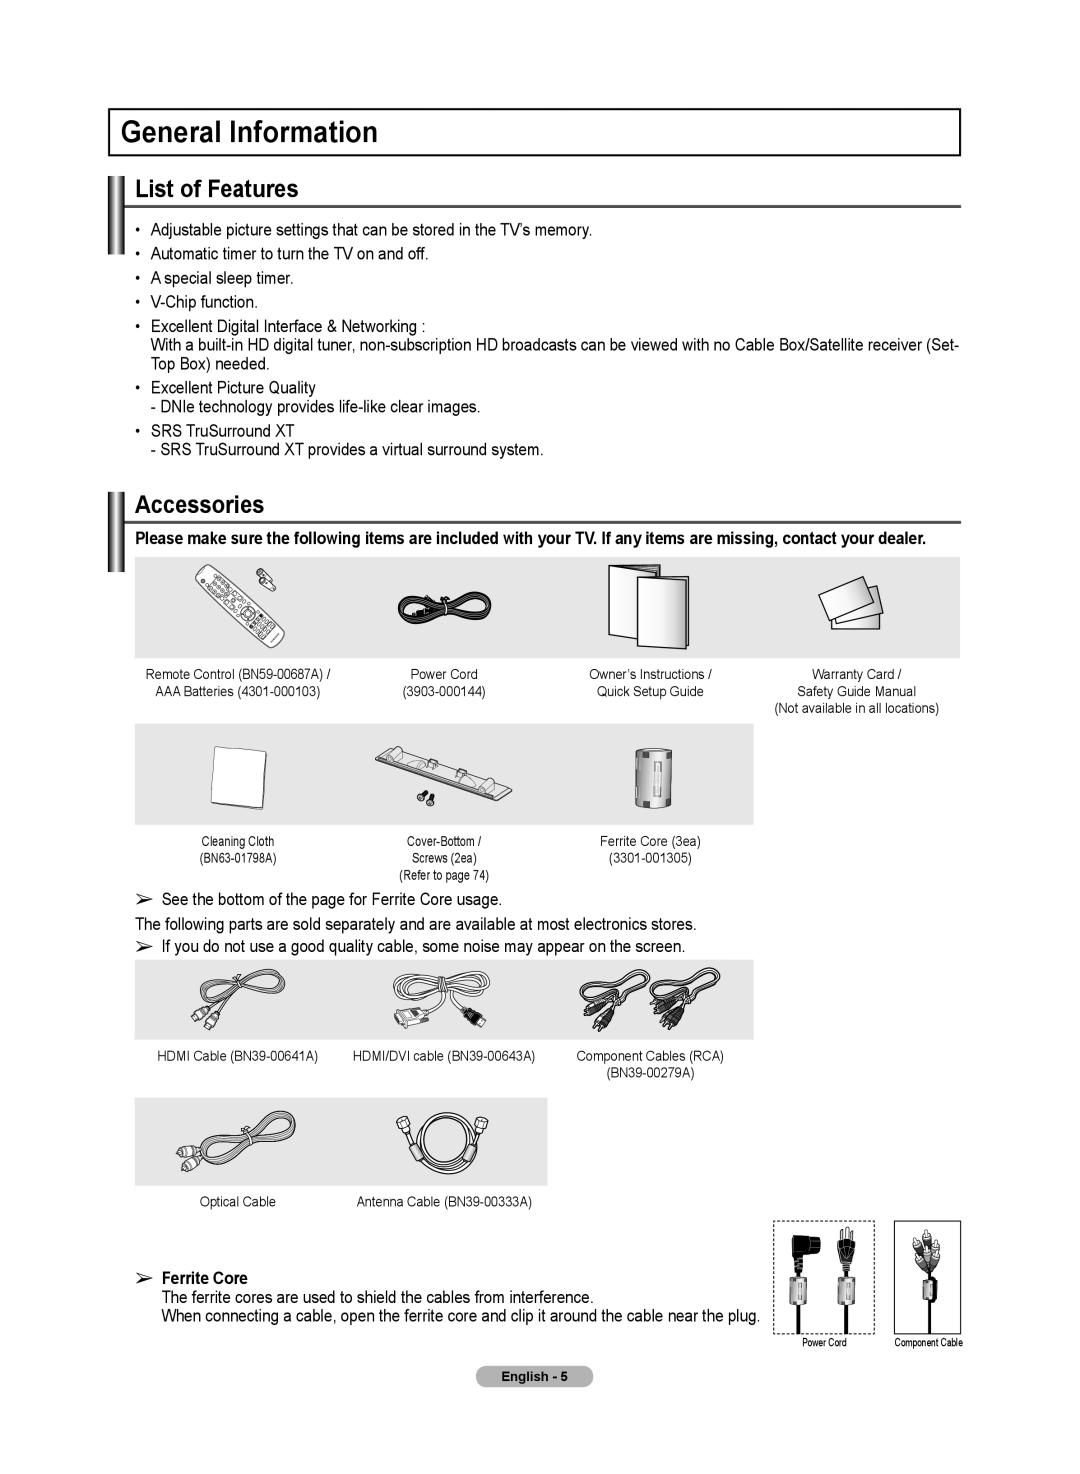 Samsung 510 user manual General Information, List of Features, Accessories, Ferrite Core 